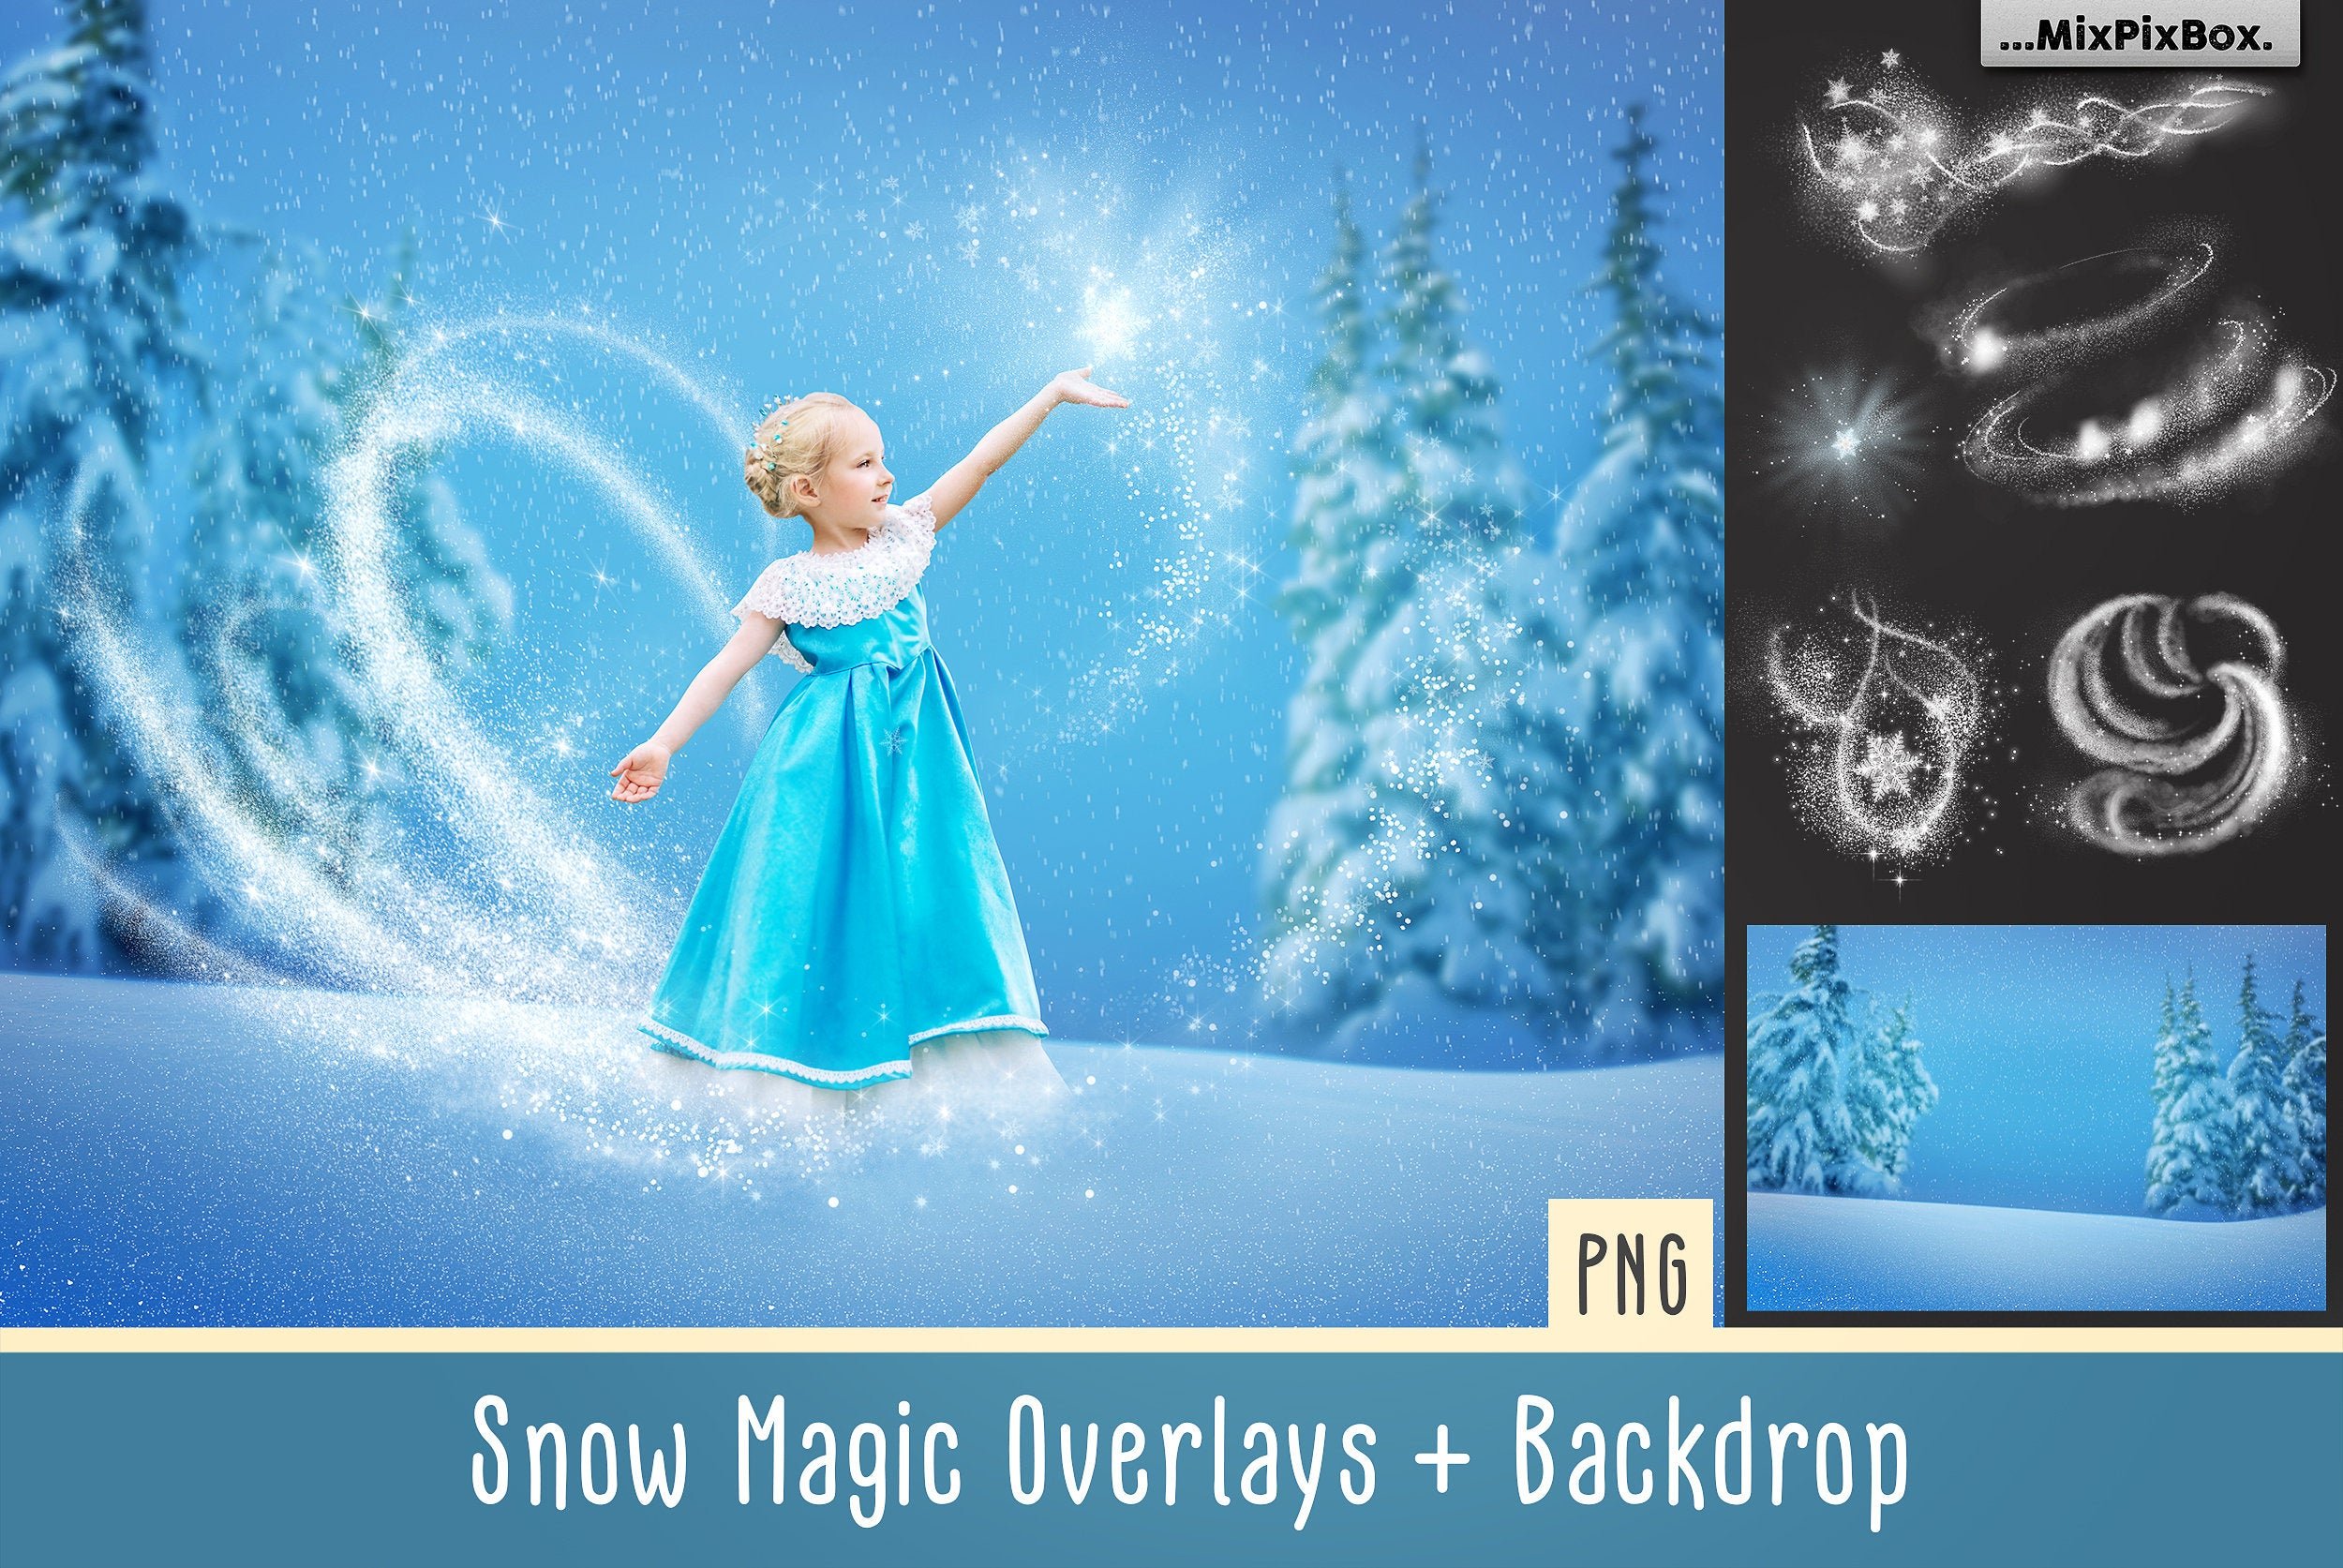 Snow Magic Overlayscover image.